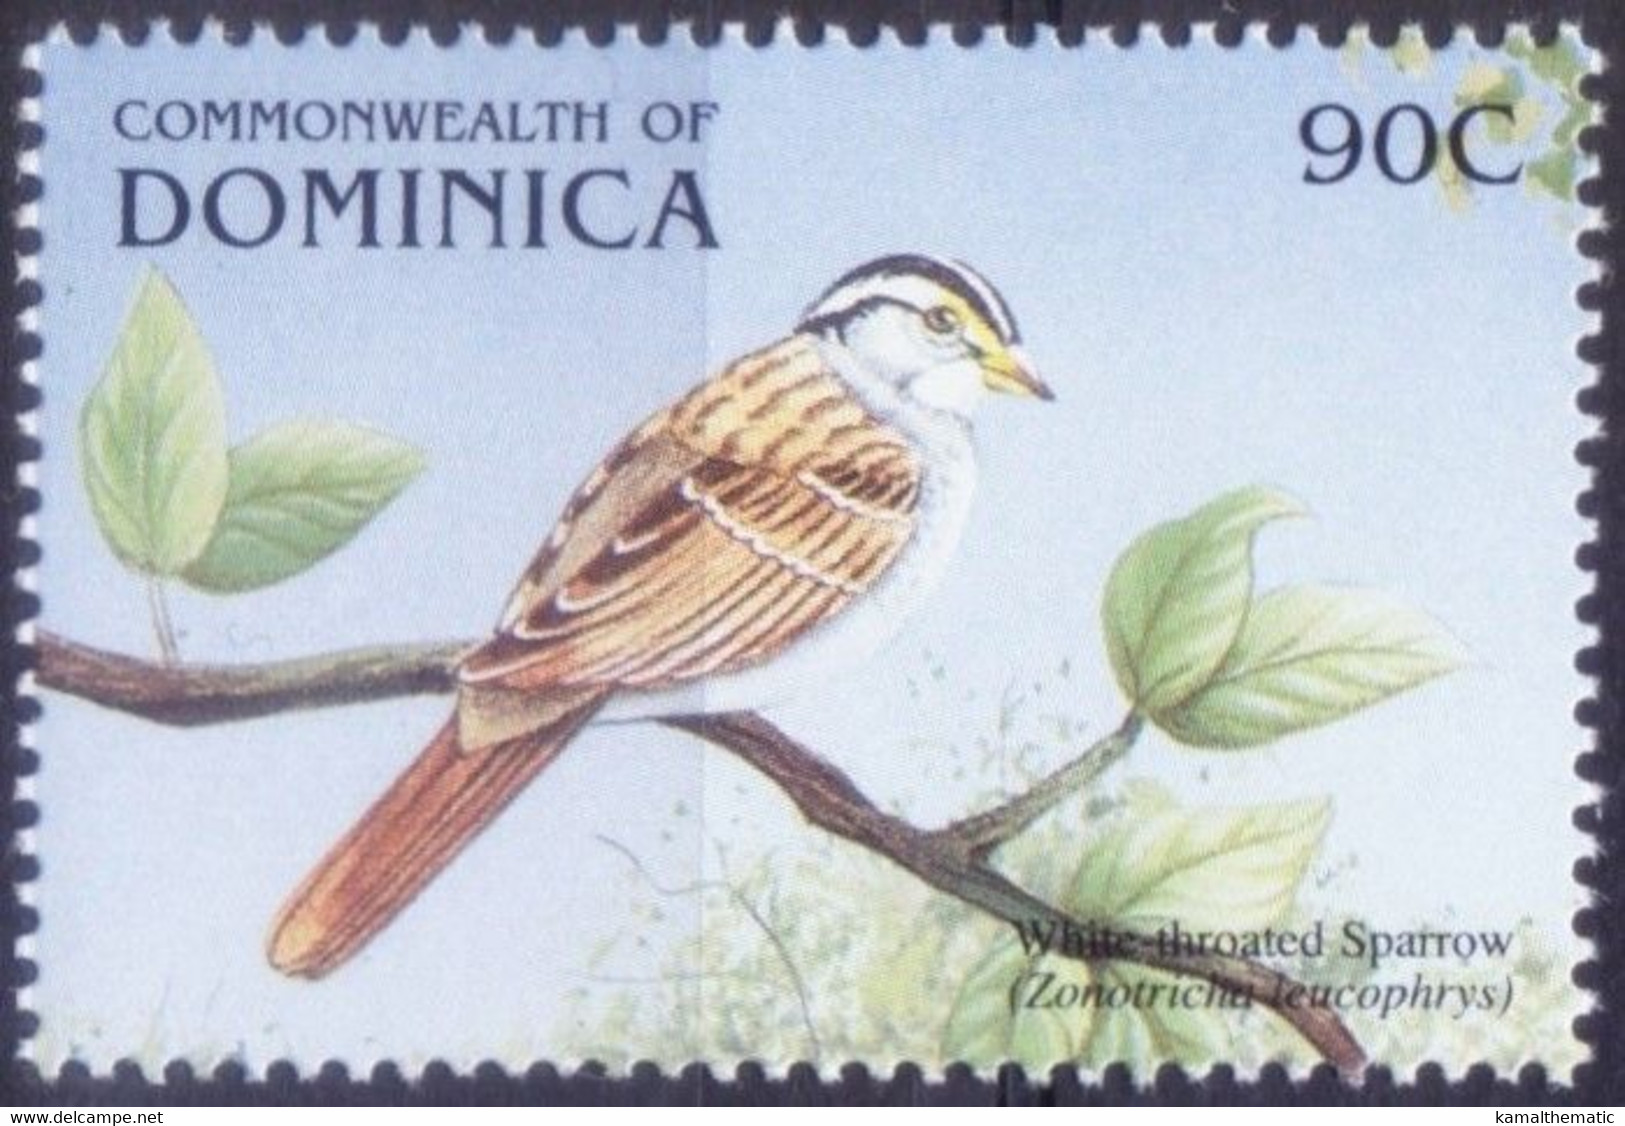 White-throated Sparrow, Birds, Dominica 1999 MNH - Sparrows